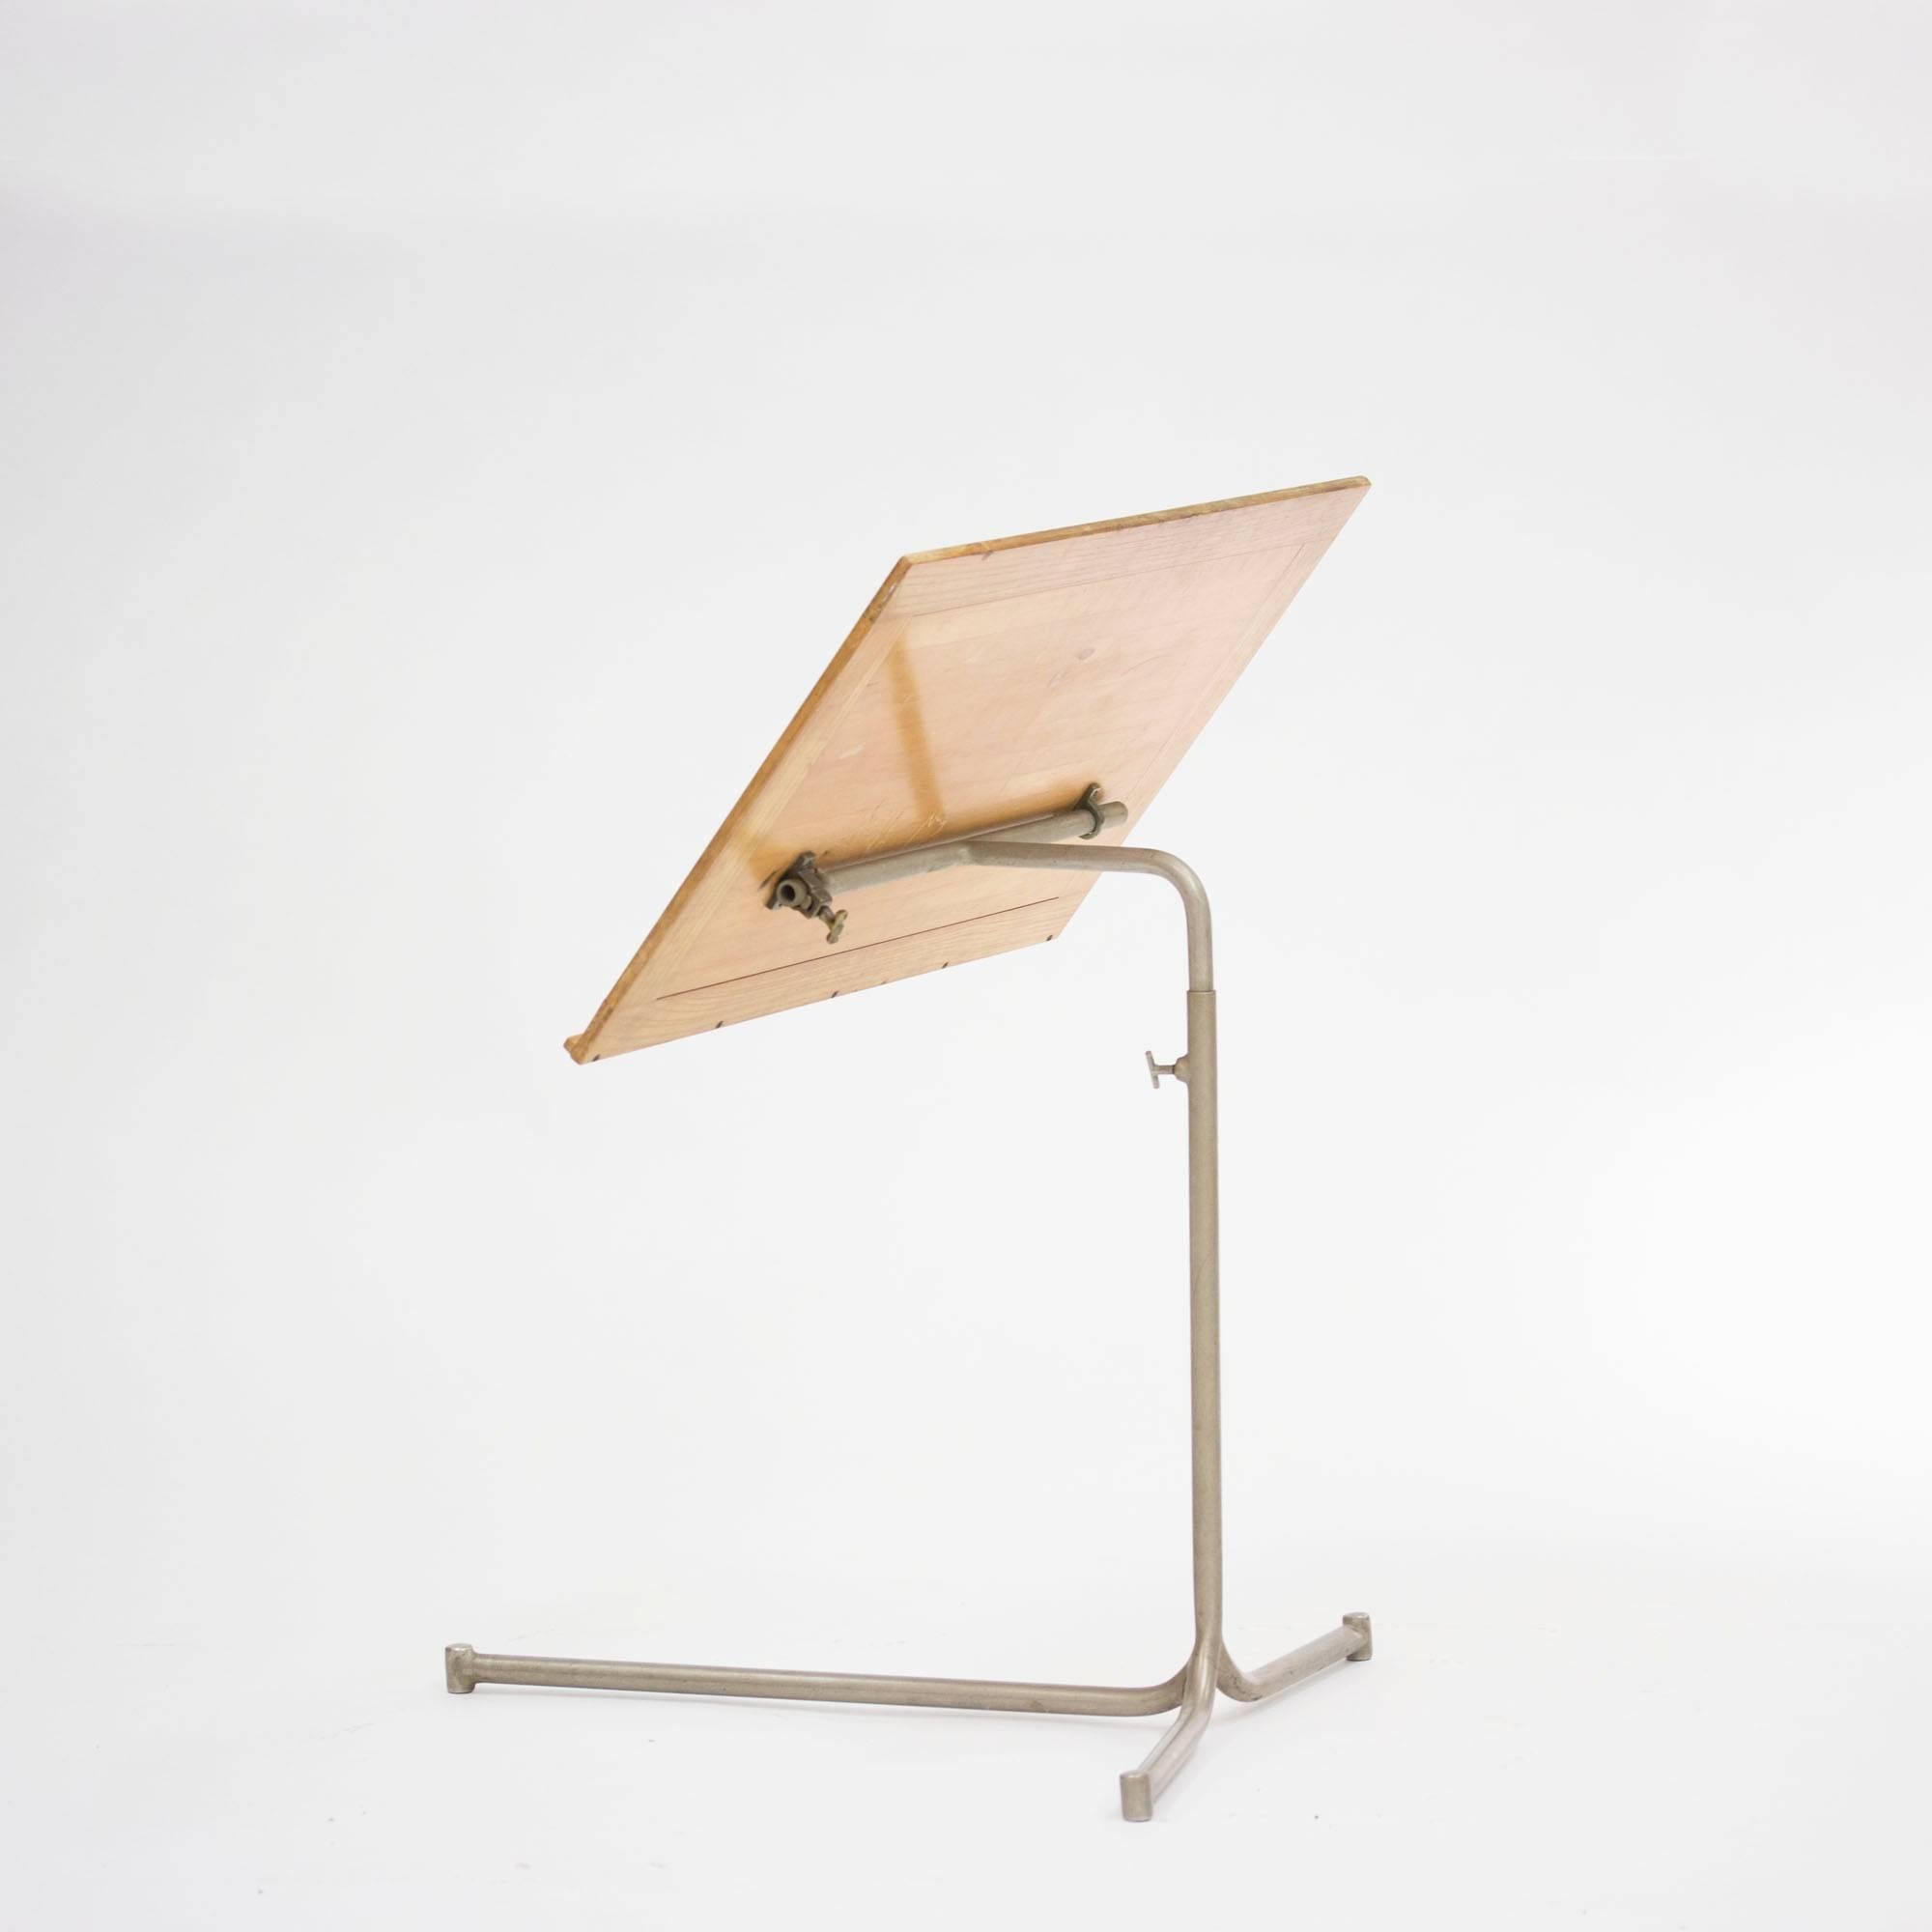 Birch and lacquered steel reading stand by Bruno Mathsson, created to accompany Mathsson's bentwood chaise lounges. The model has been used as a versatile side table in homes as well as in office spaces. This very early piece is from 1941 and